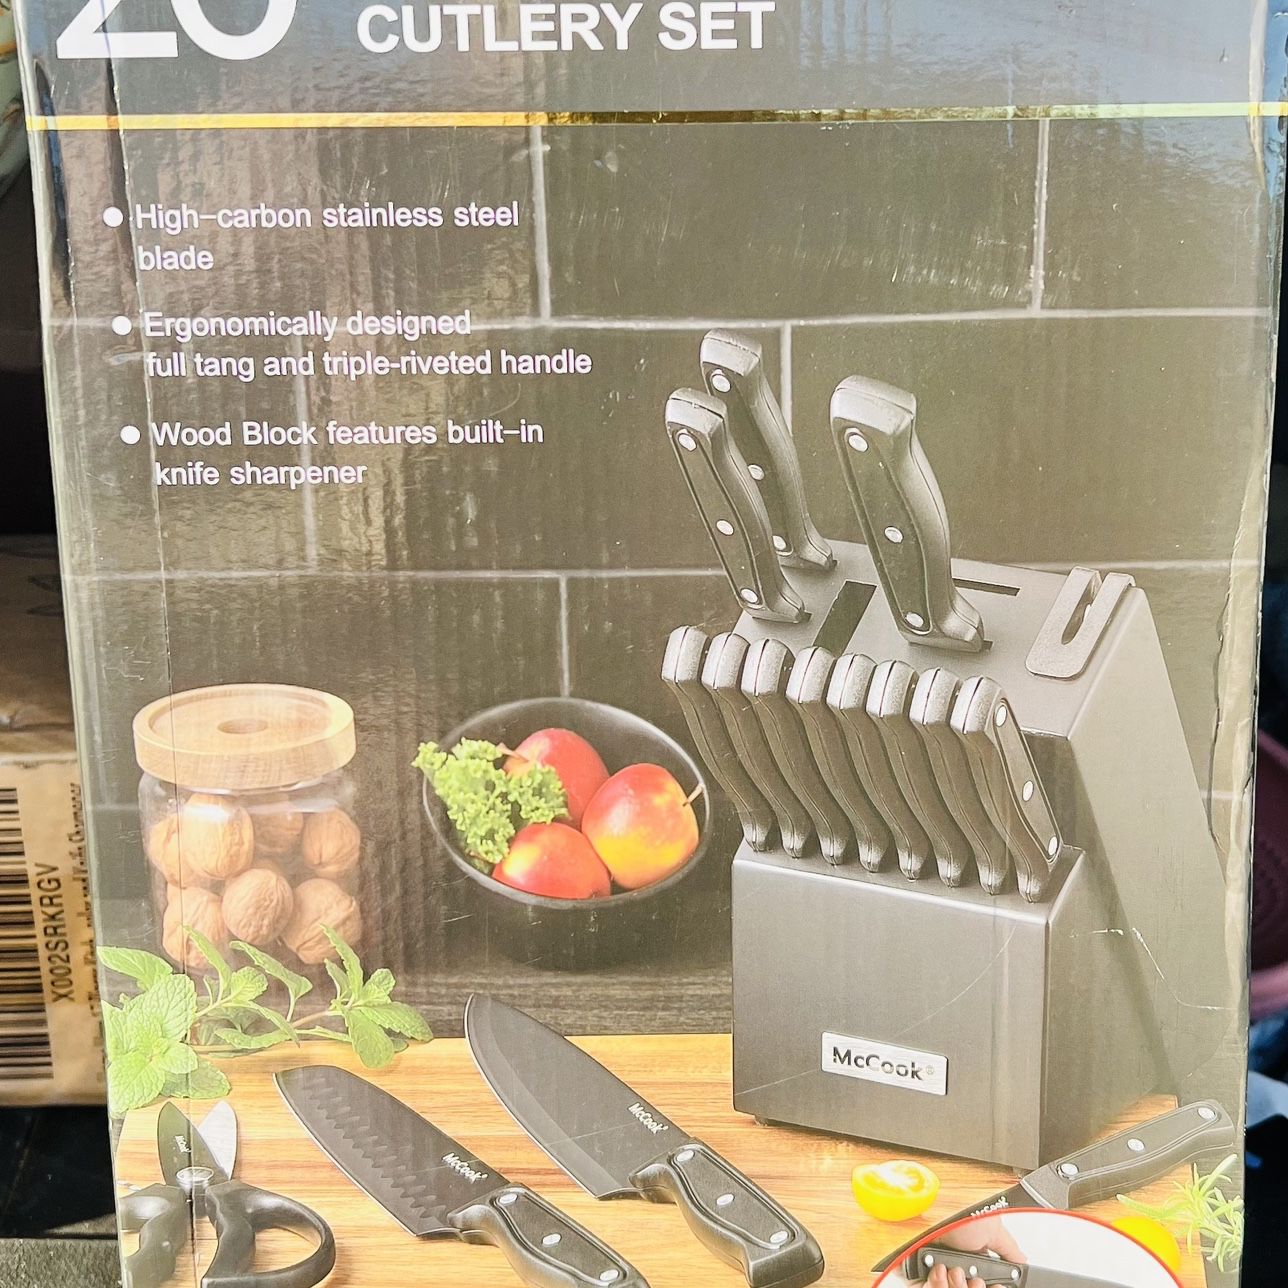 McCook MC21B Knife Sets, 15 Pieces German Stainless Steel Knife Block Sets  with Built-in Sharpener, Black for Sale in San Antonio, TX - OfferUp